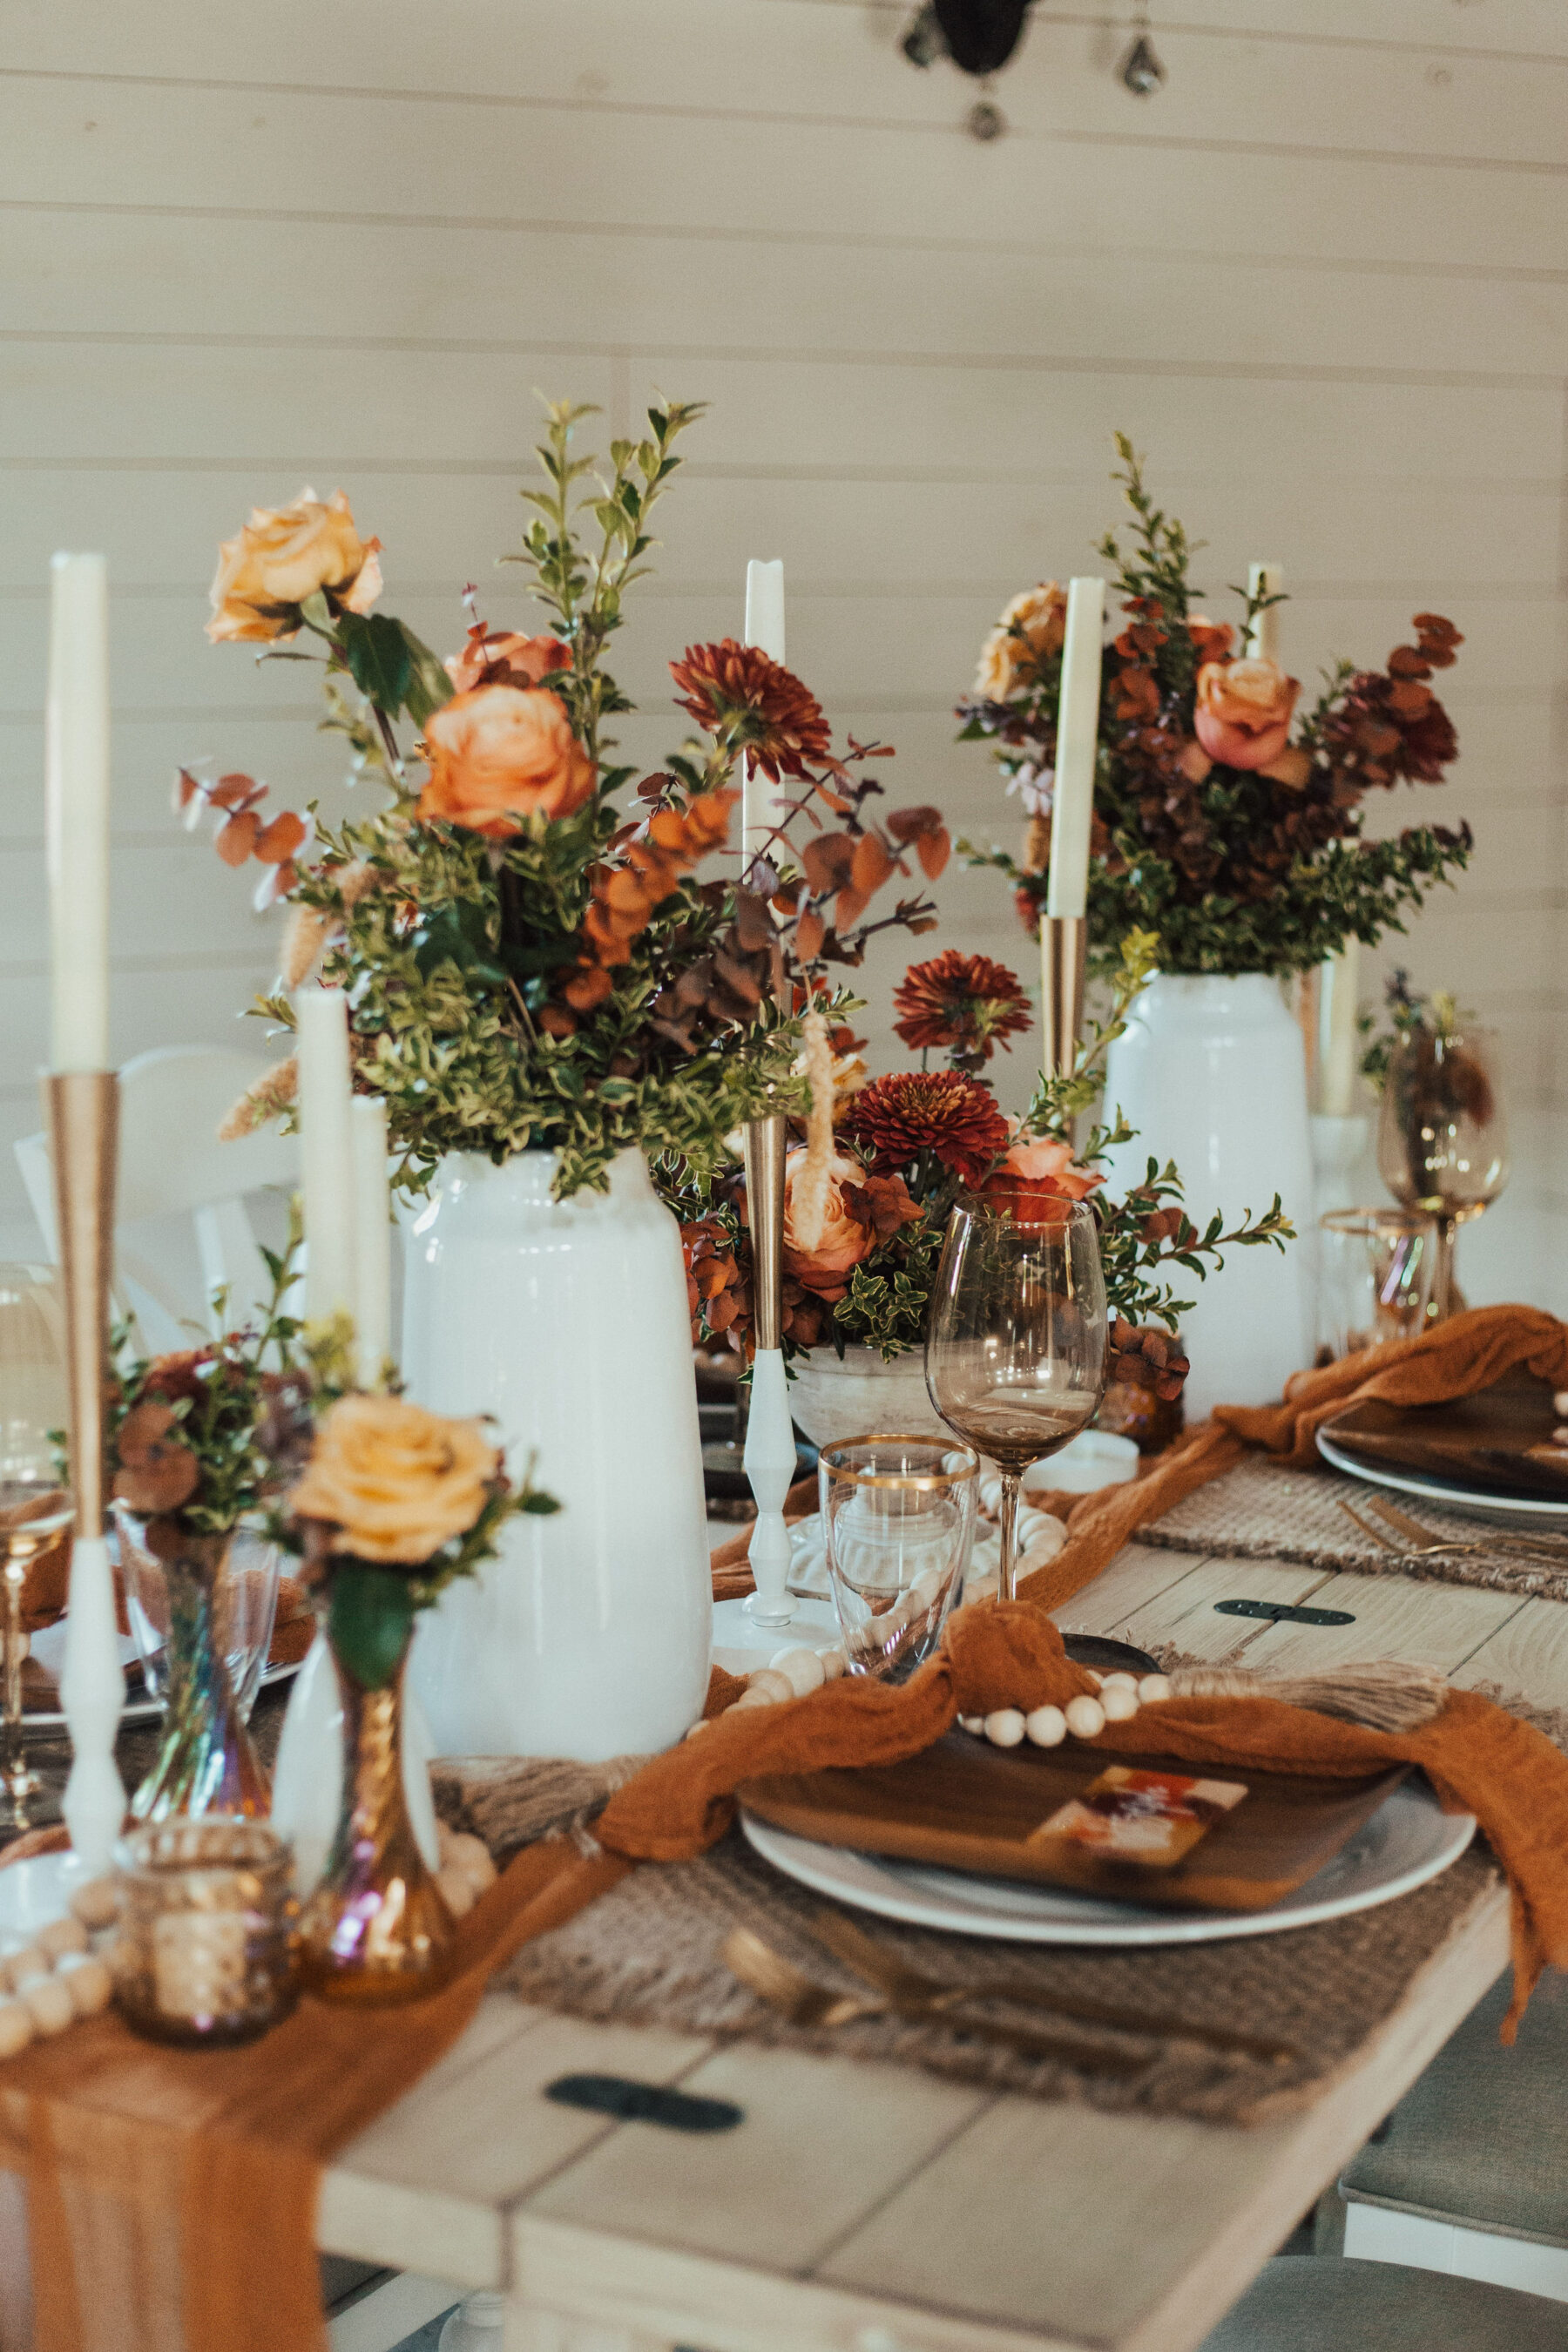 Wedding centerpieces: Bright Bohemian Photo Shoot from Ina J Designs